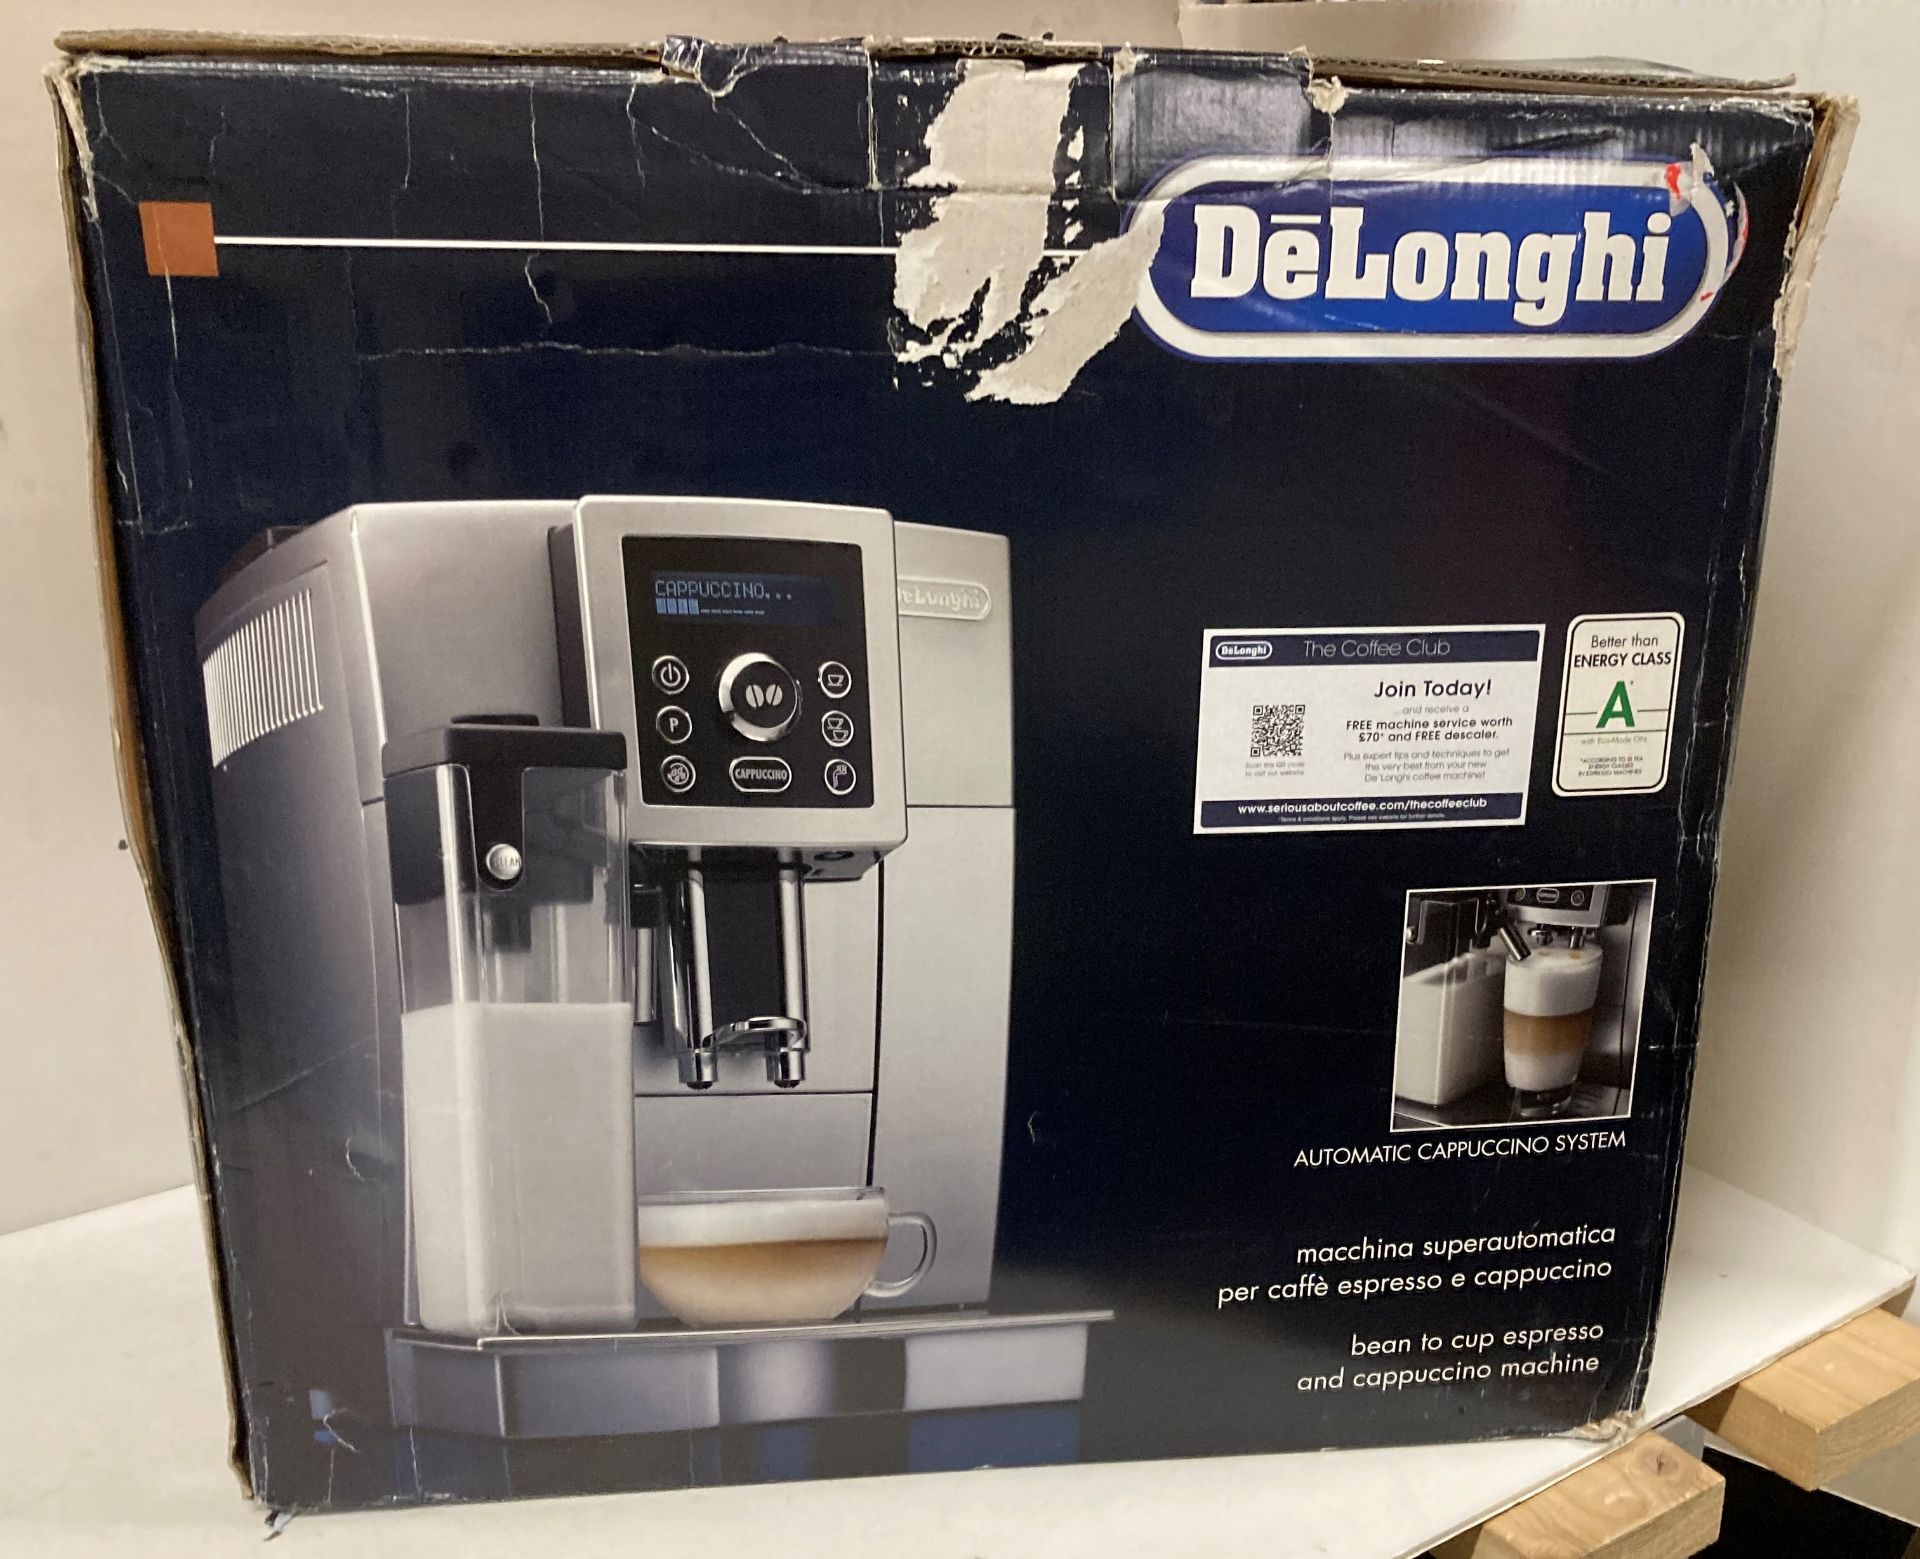 Delonghi automatic cappuccino system (saleroom location: K13) Further Information